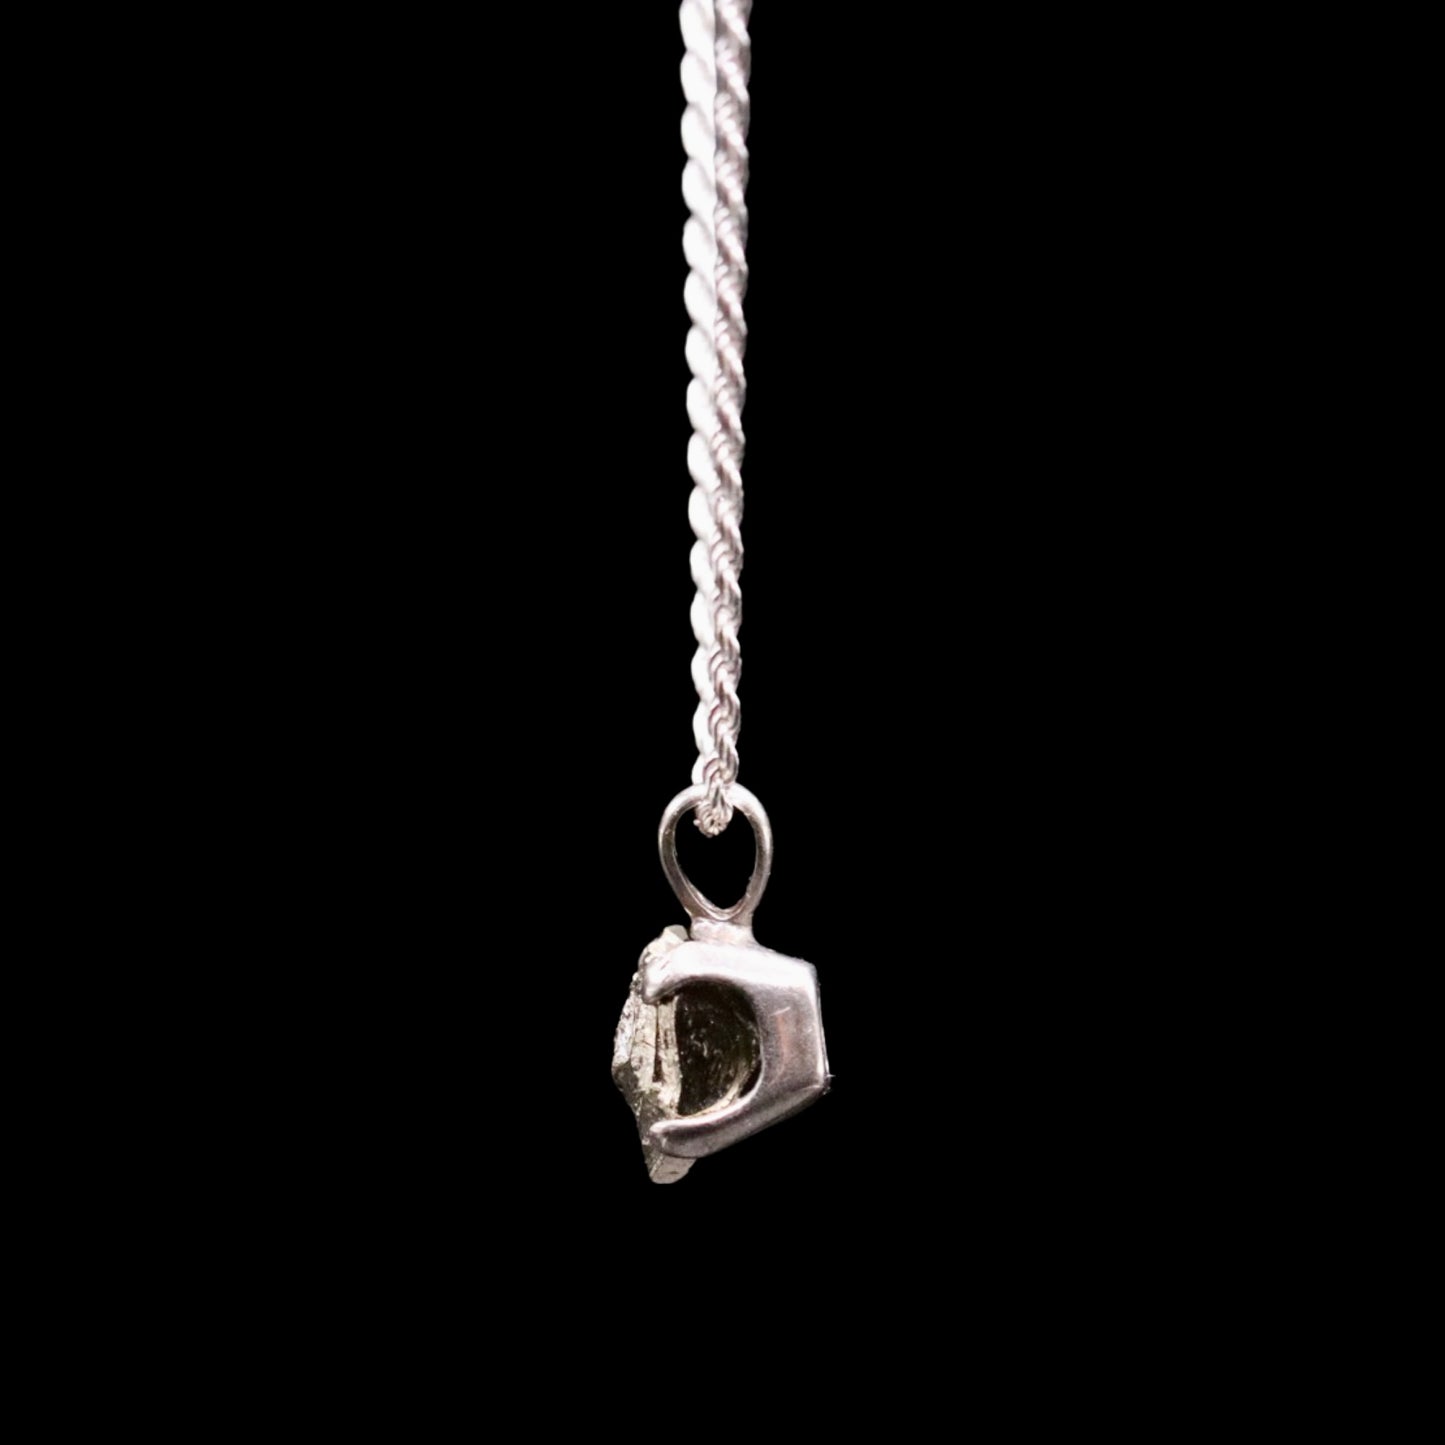 Natural Petite Peruvian Pyrite Solitaire on Rope